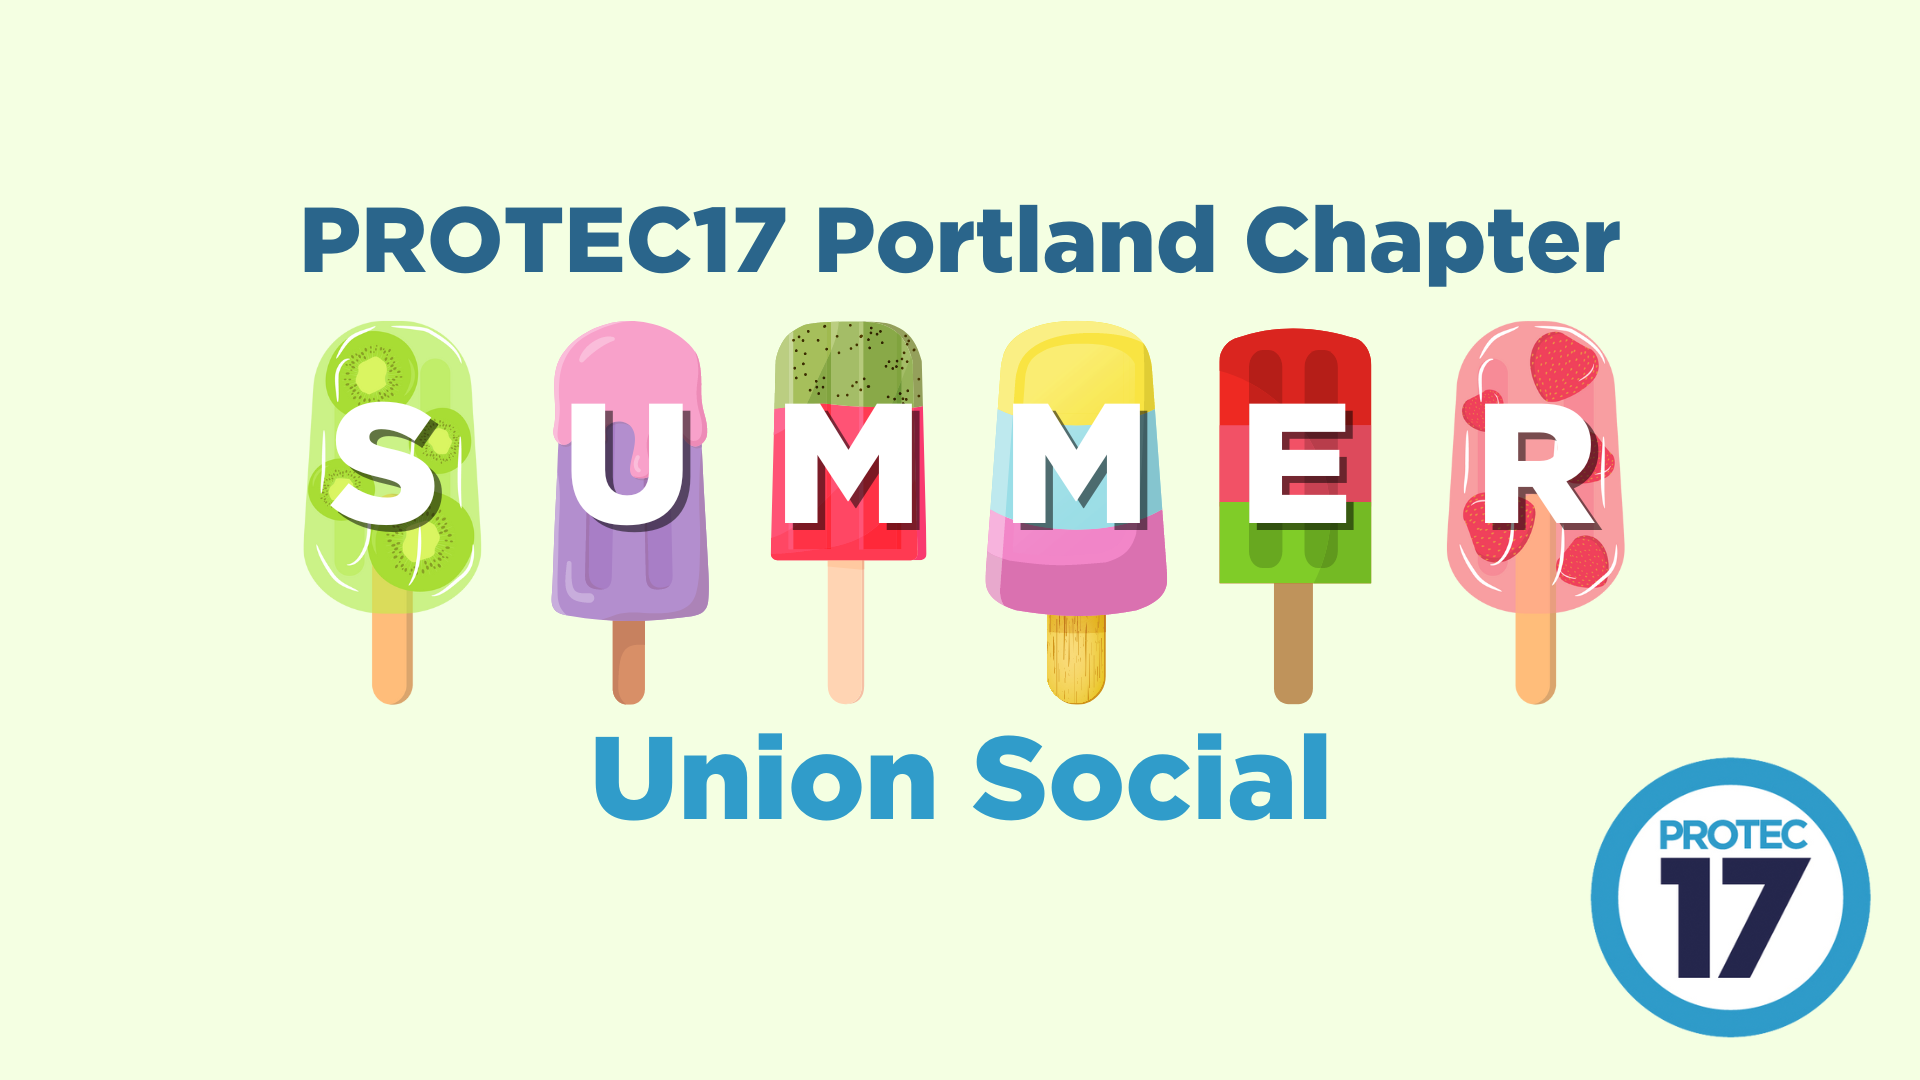 Text reads, "PROTEC17 Portland Chapter SUMMER Union Social." The word "Summer" has each letter over a different colorful popsicle illustration. The PROTEC17 logo is in the bottom right.